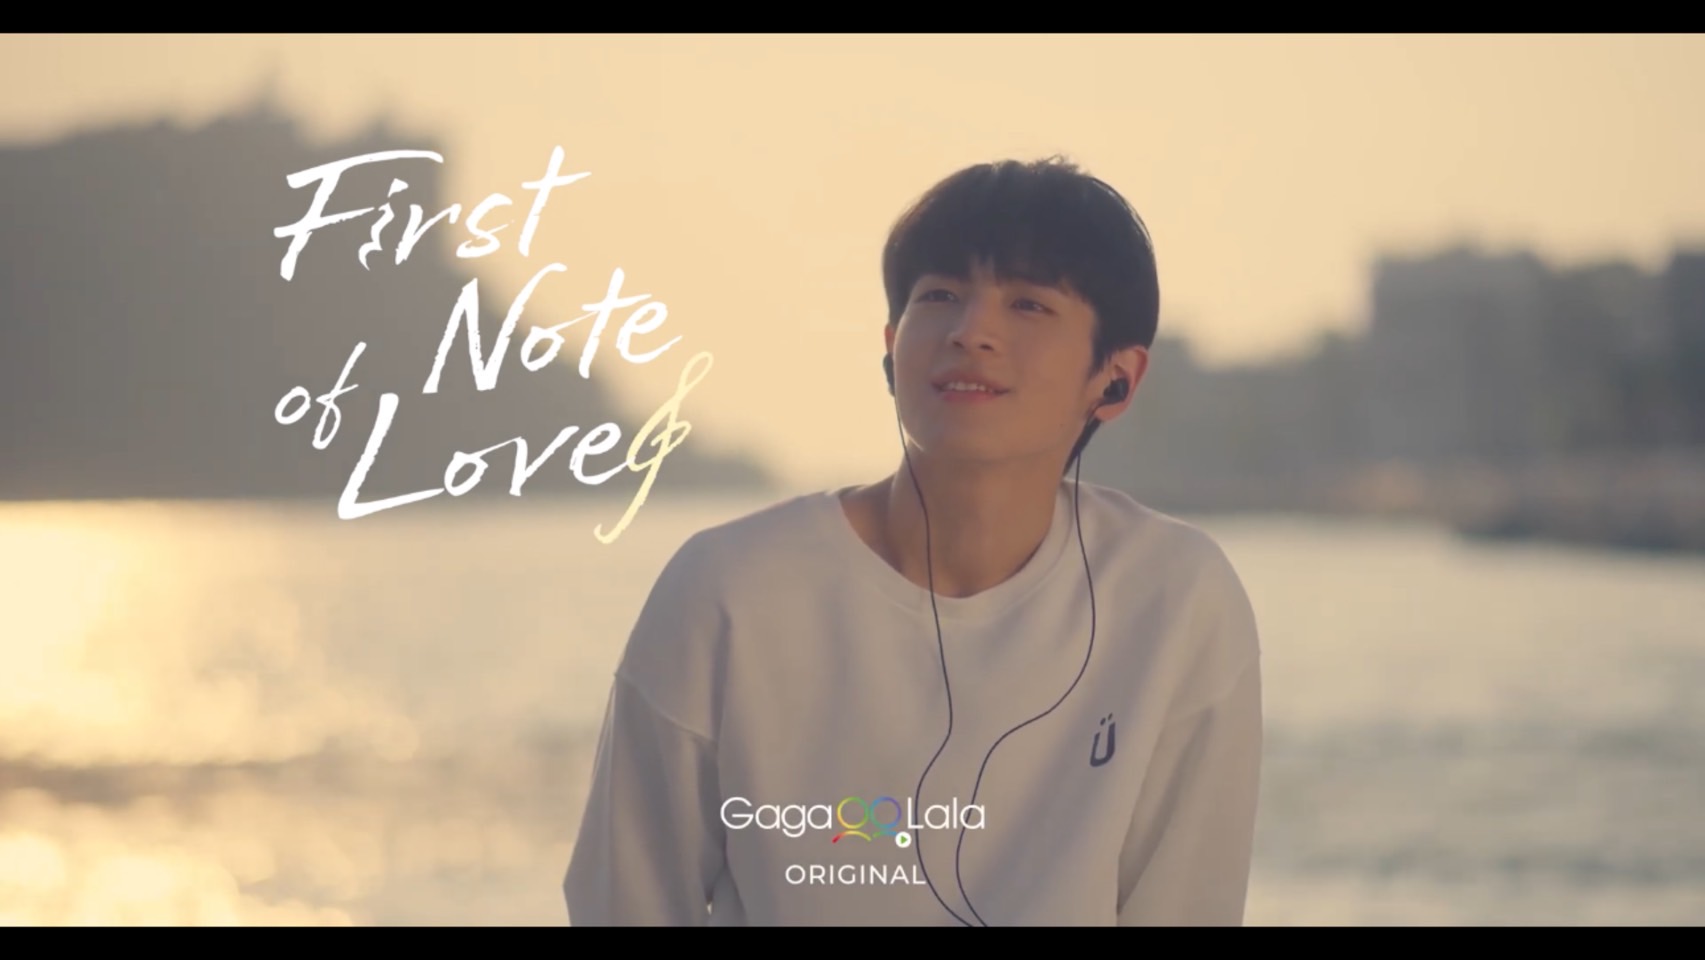 First Note of Love